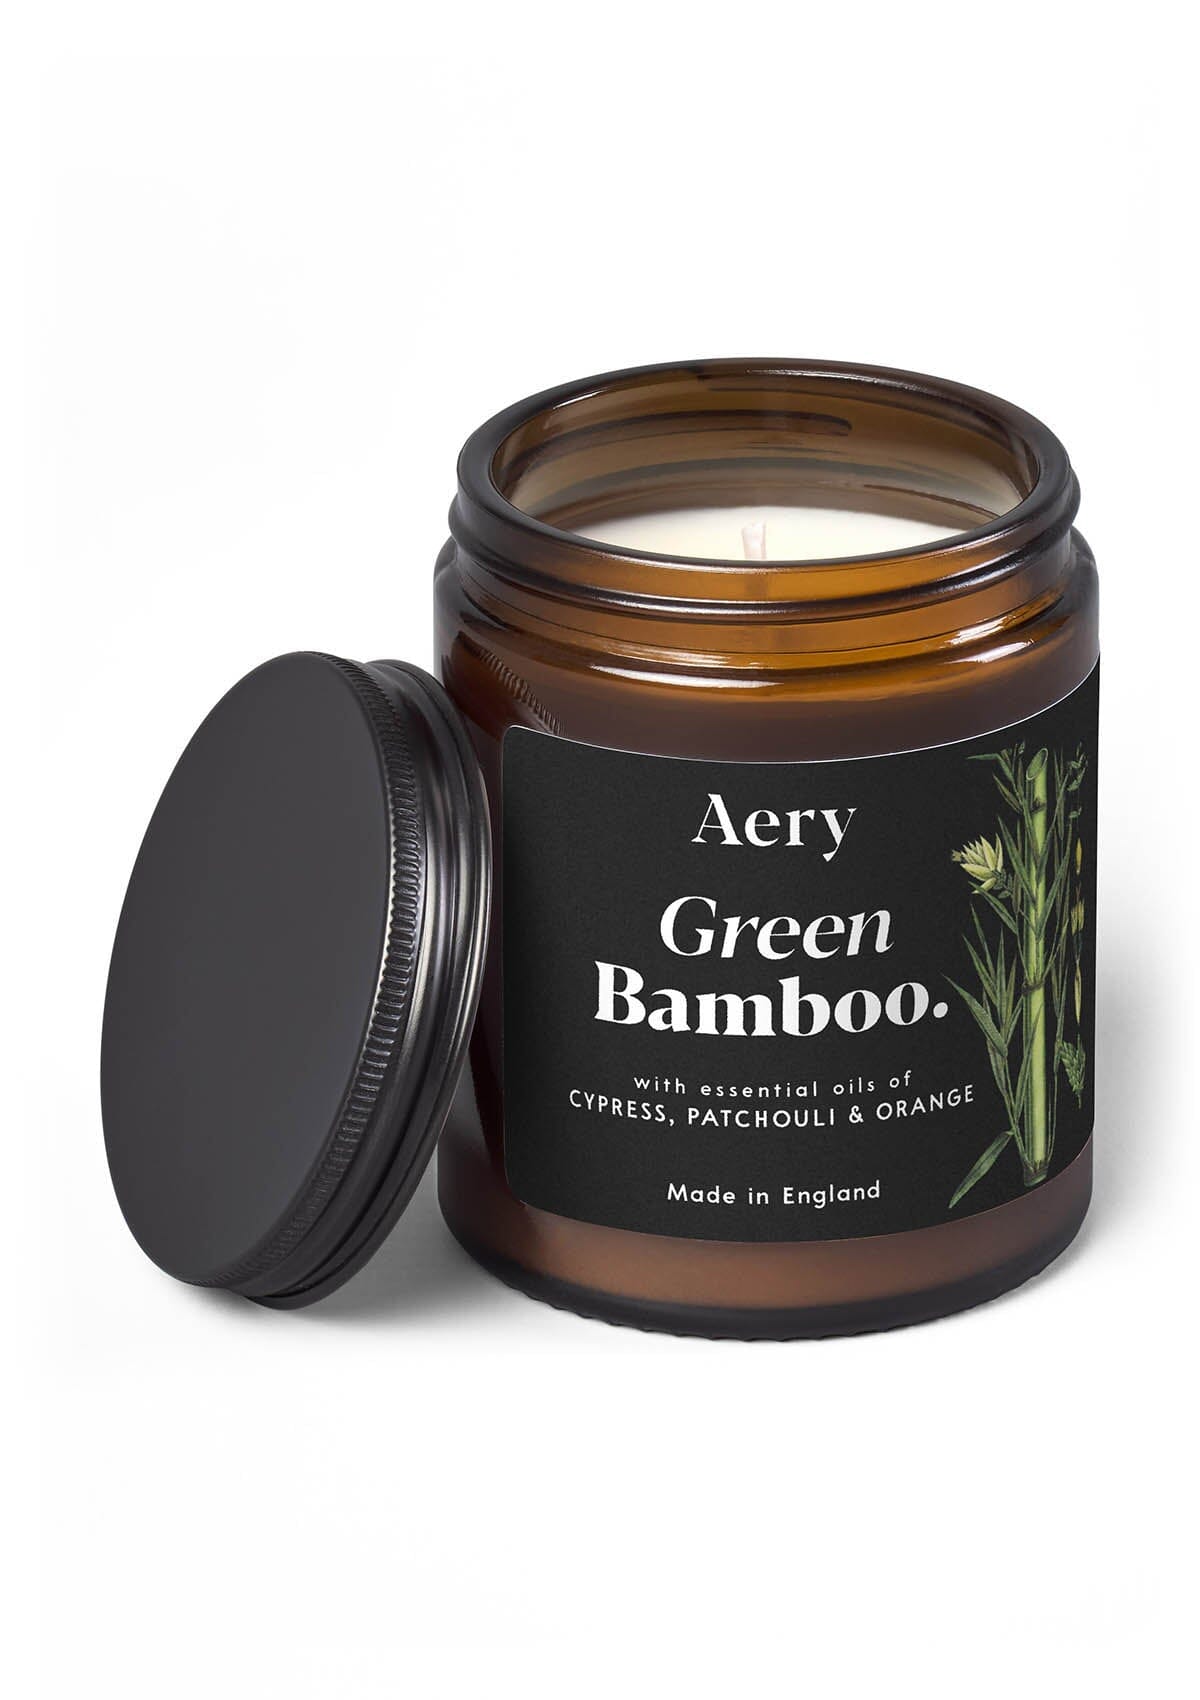 Green Bamboo jar candle by Aery displayed on white background 